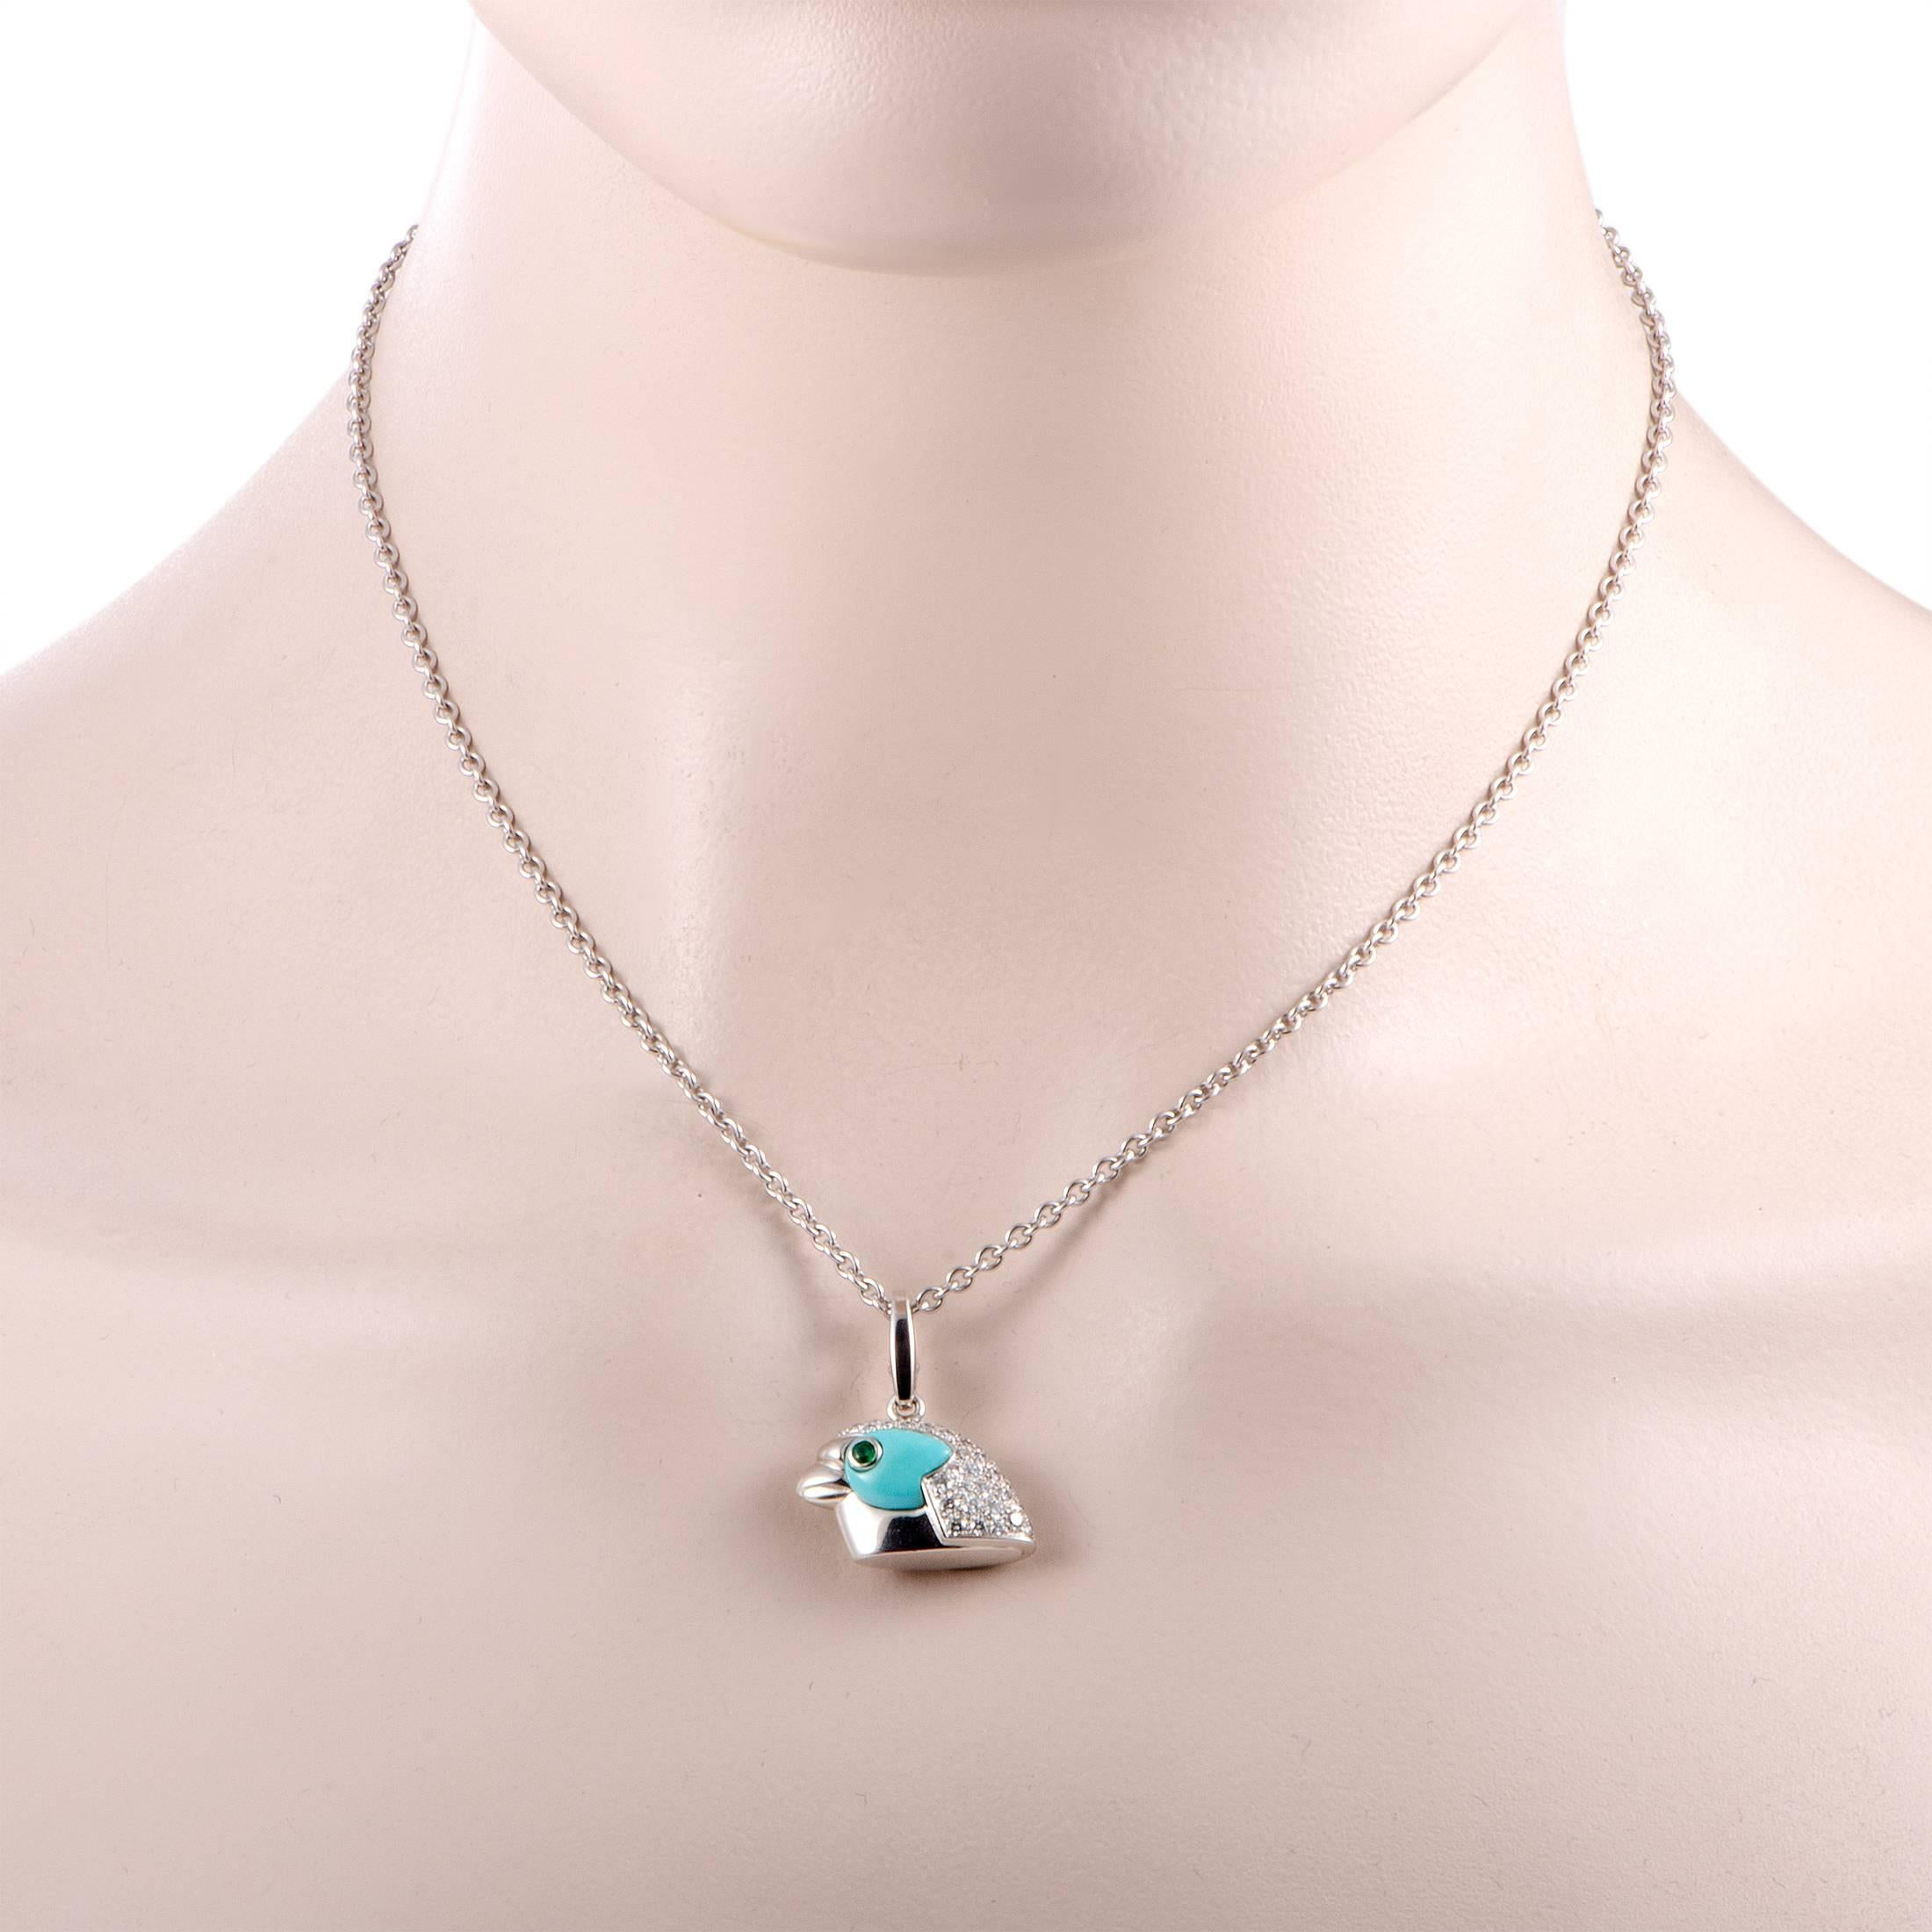 This limited edition piece from Cartier offers an endearingly elegant appearance accentuated by attractive emerald and turquoise stones. The necklace is made of luxurious 18K white gold and is also embellished with approximately 1.50 carats of